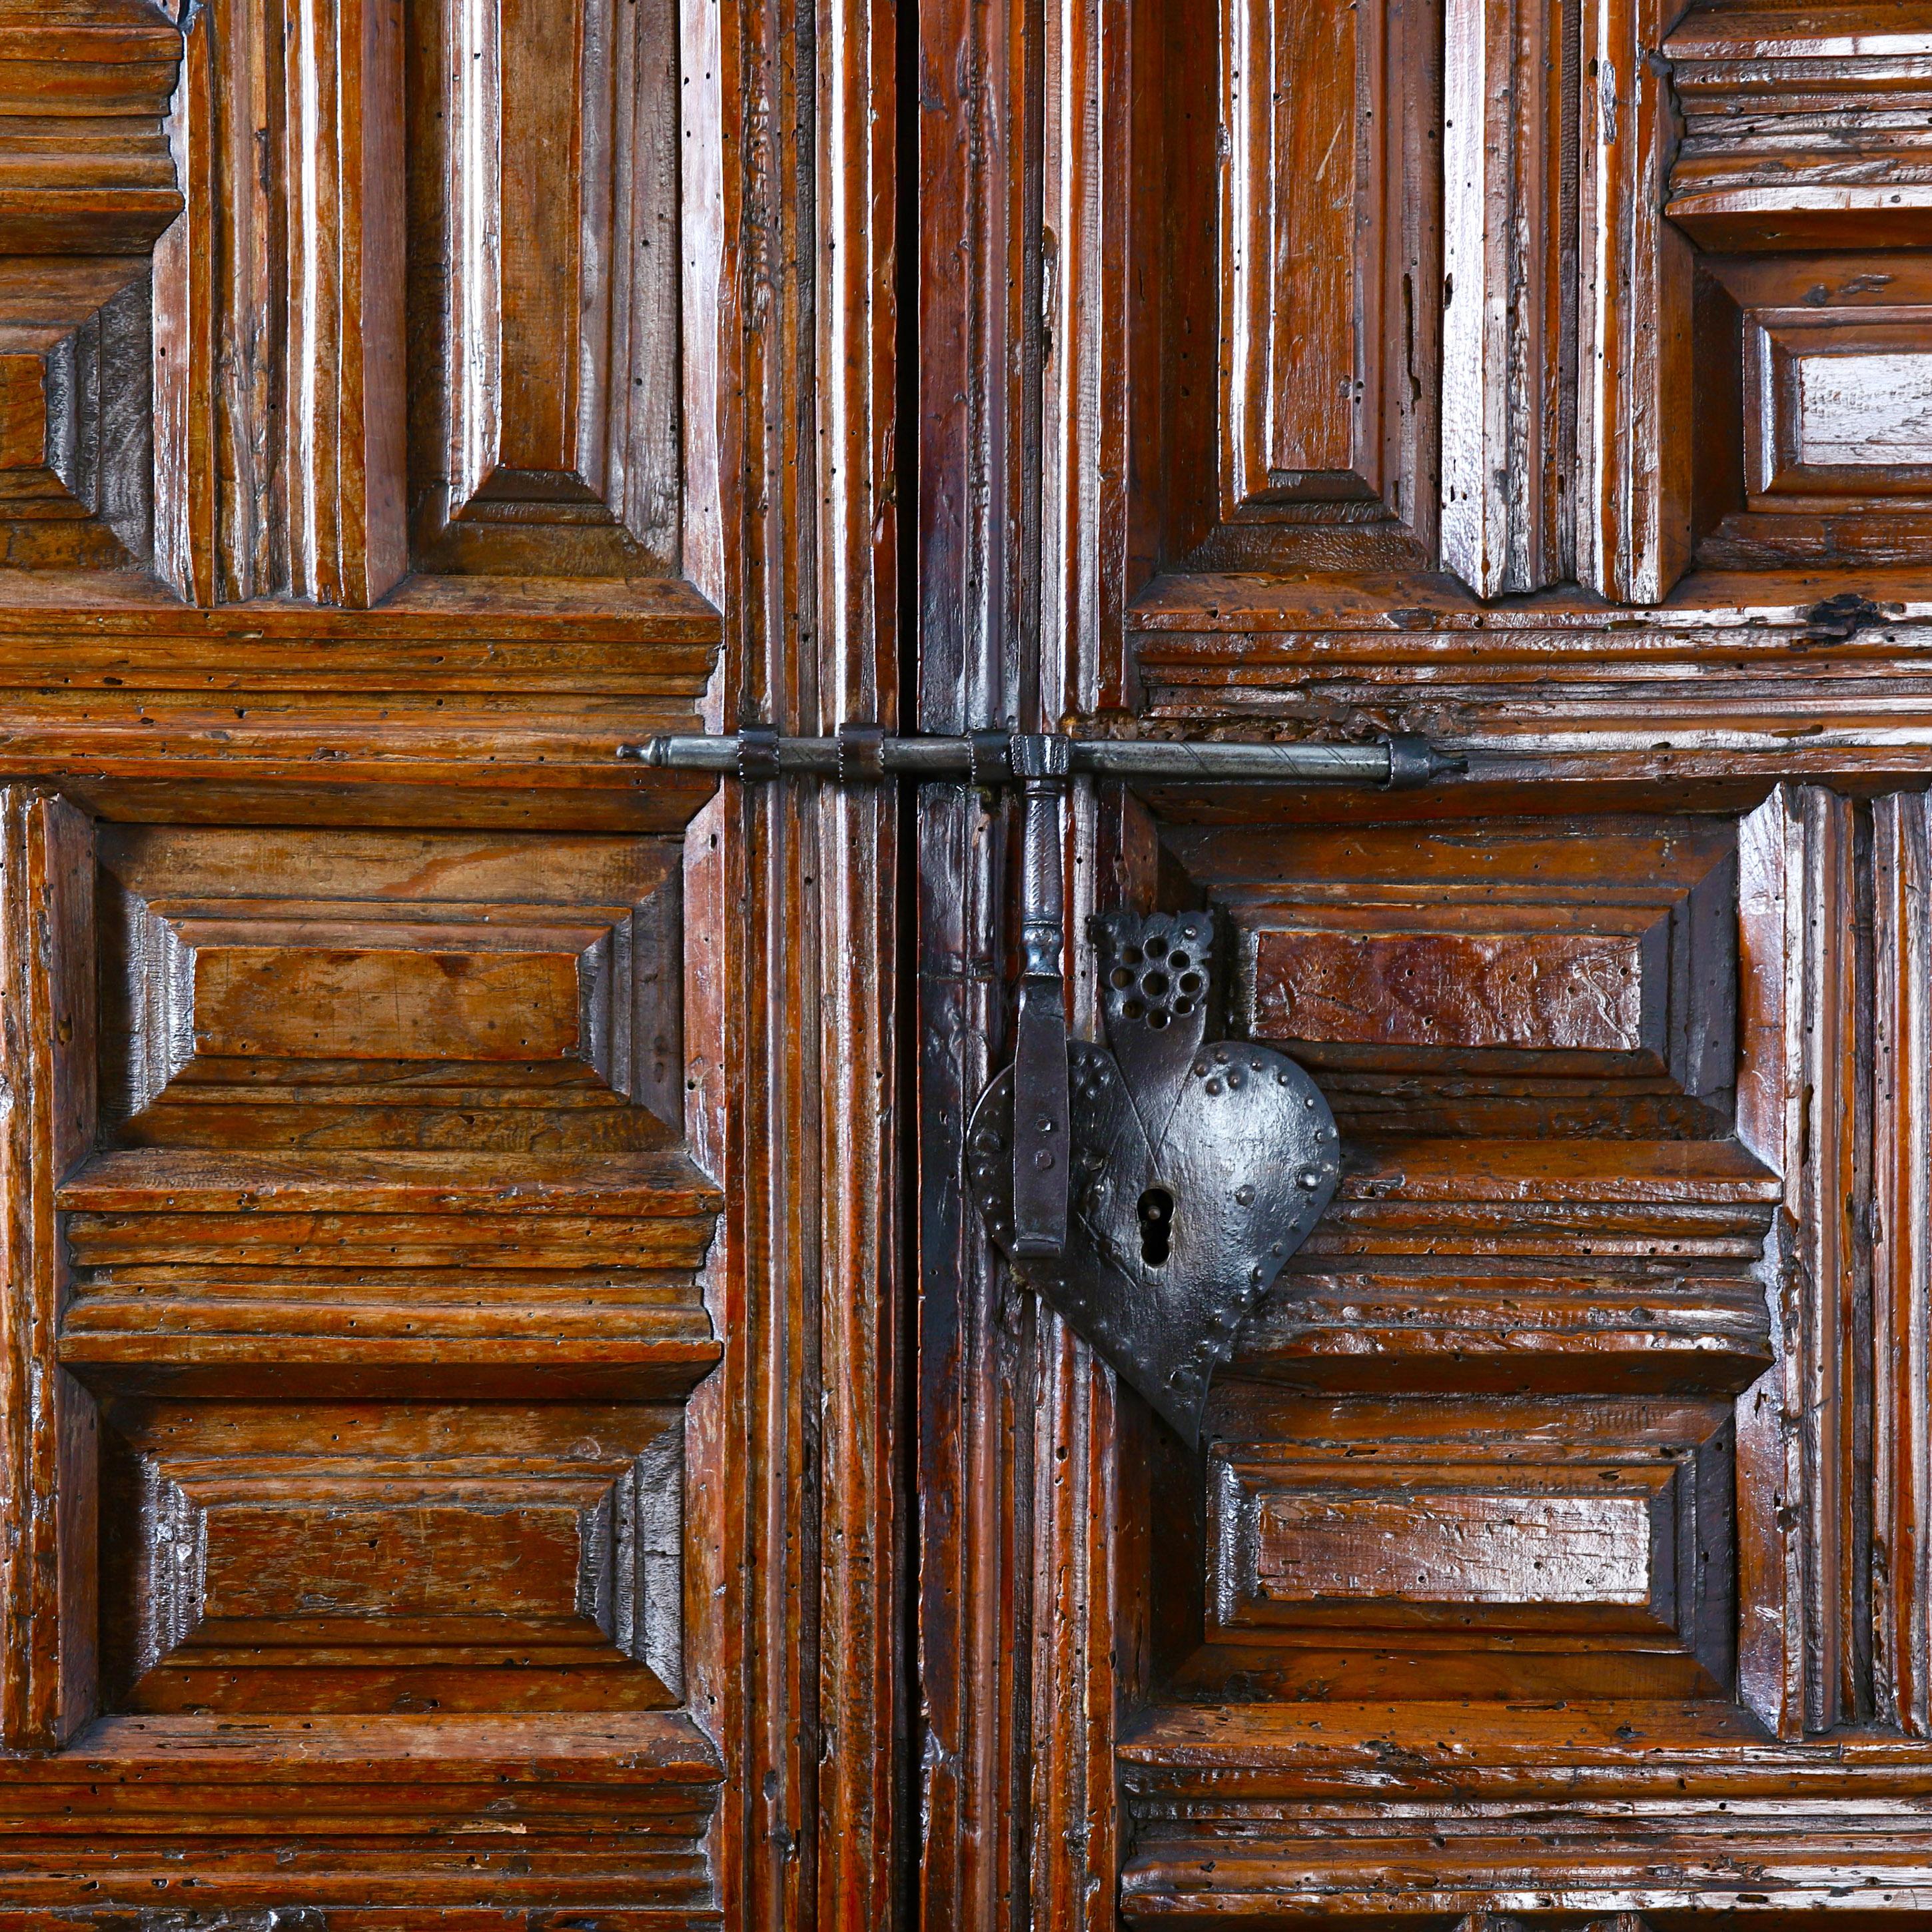 A charming provincial 17th century Spanish cupboard all carved from solid walnut, with geometric panels, and wonderful original ironwork in the shape of a love heart more than likely indicating this would've been a wedding gift or marriage